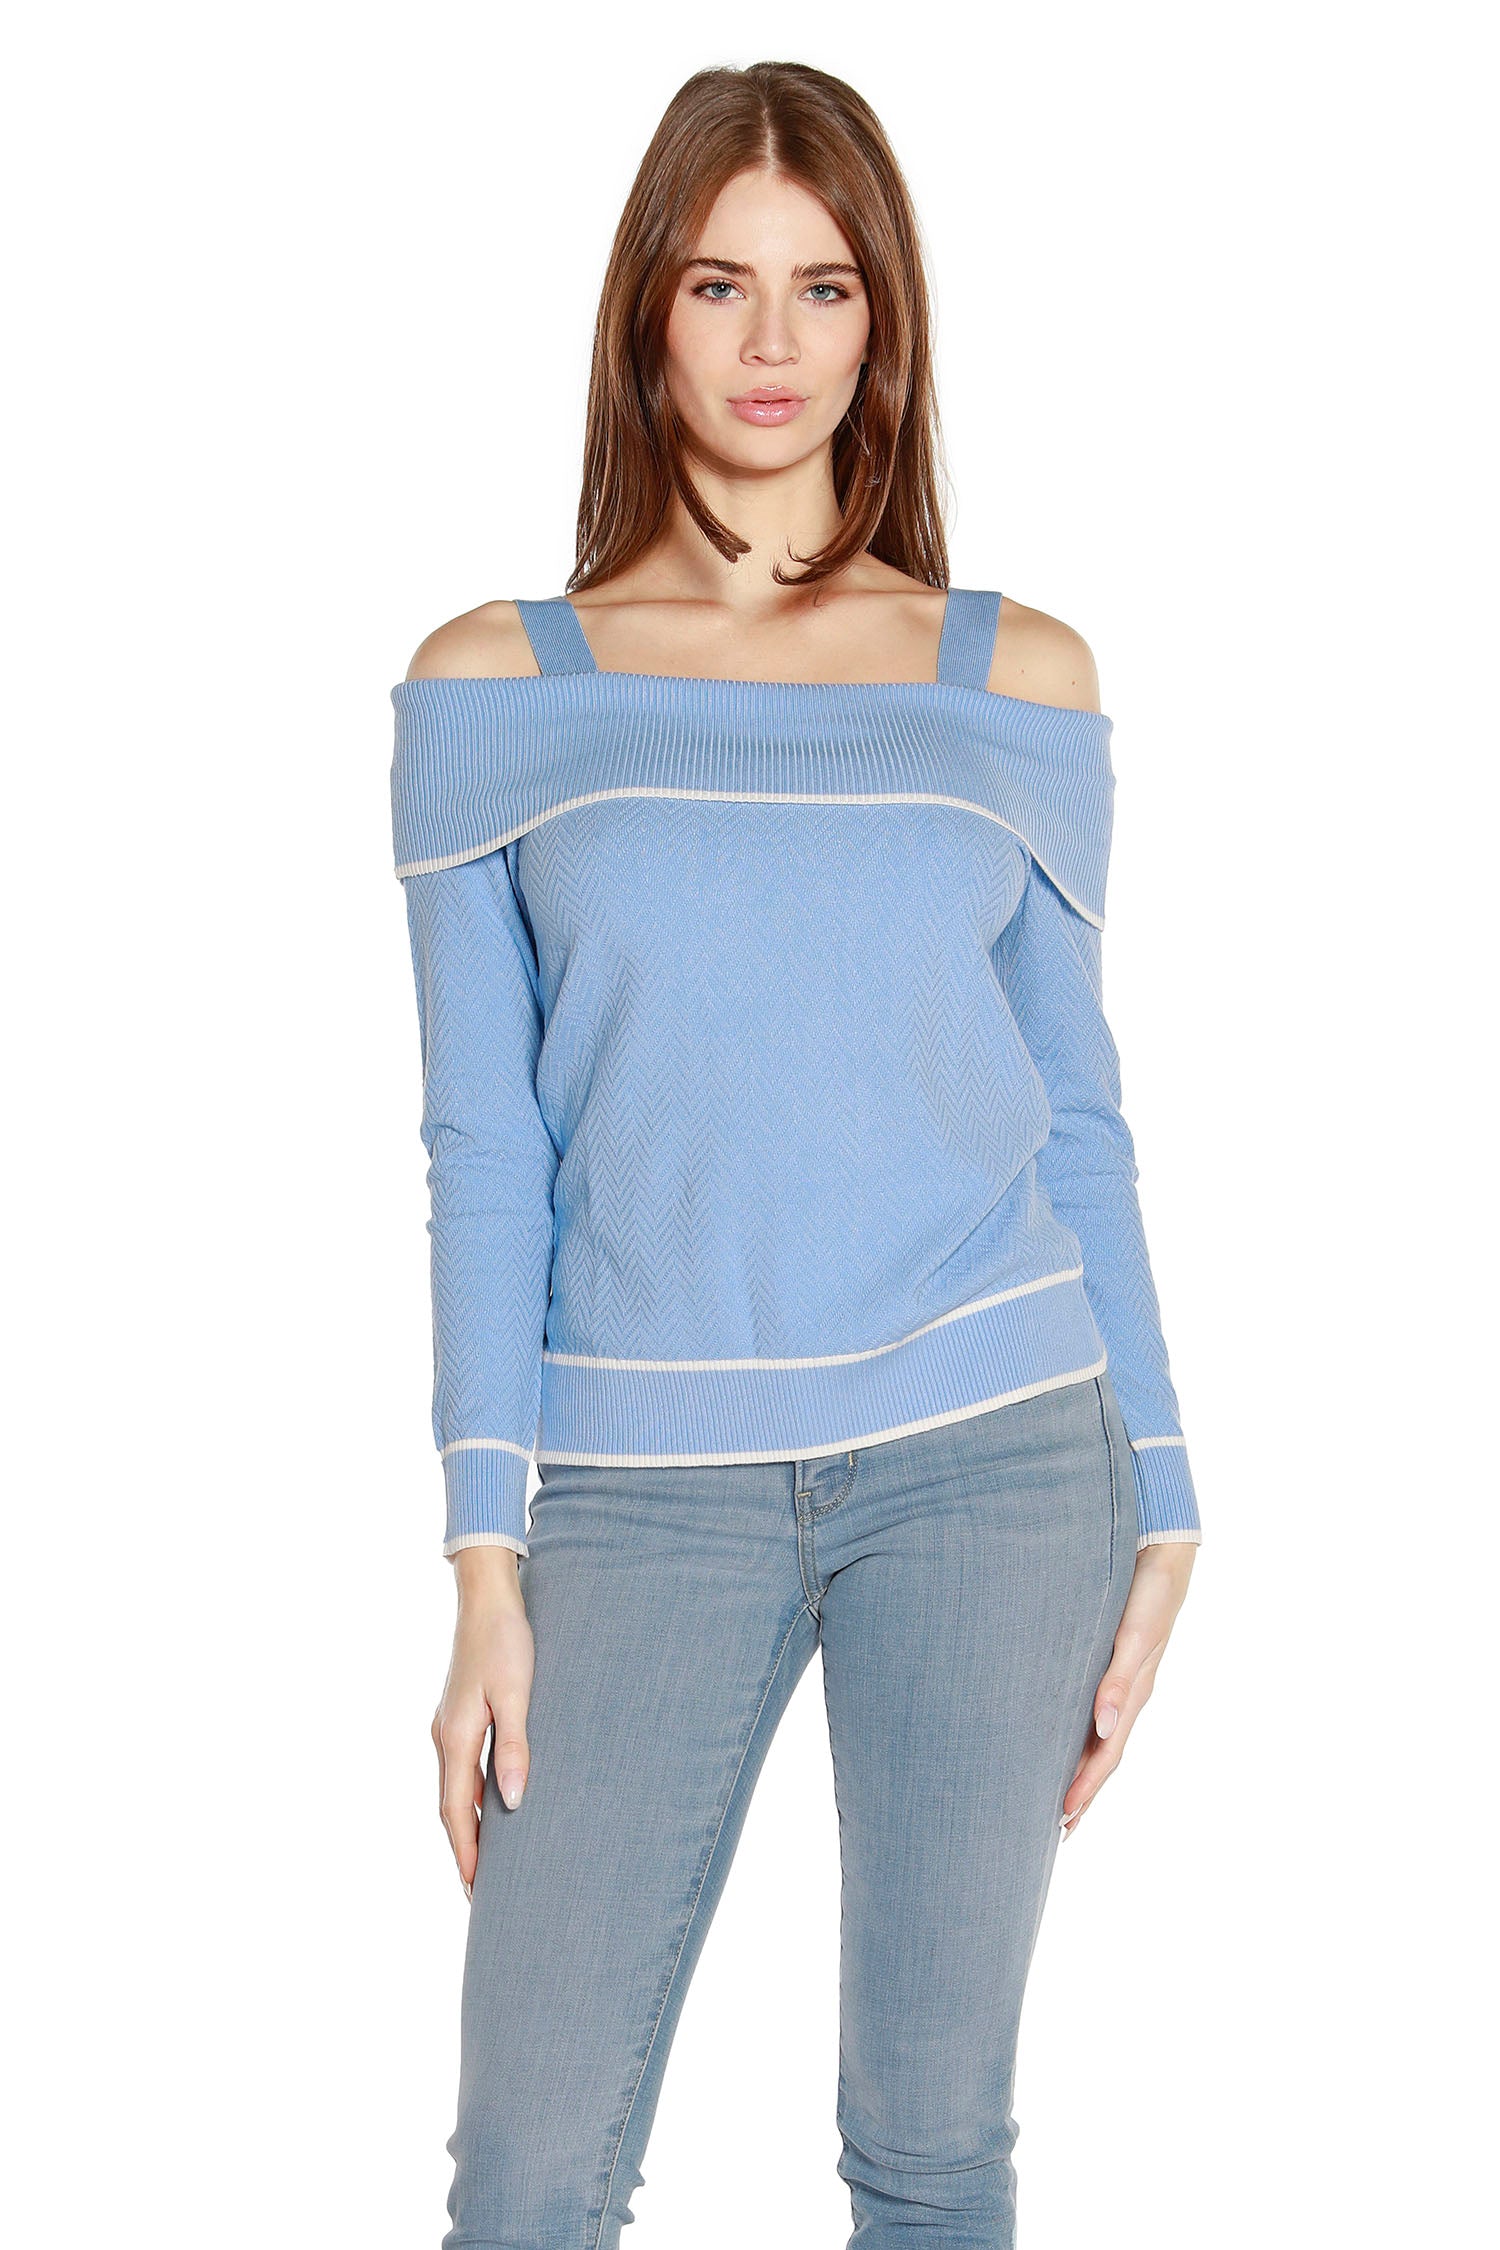 Women’s Slouchy Off the Shoulder Sweater with Fold Over Yoke